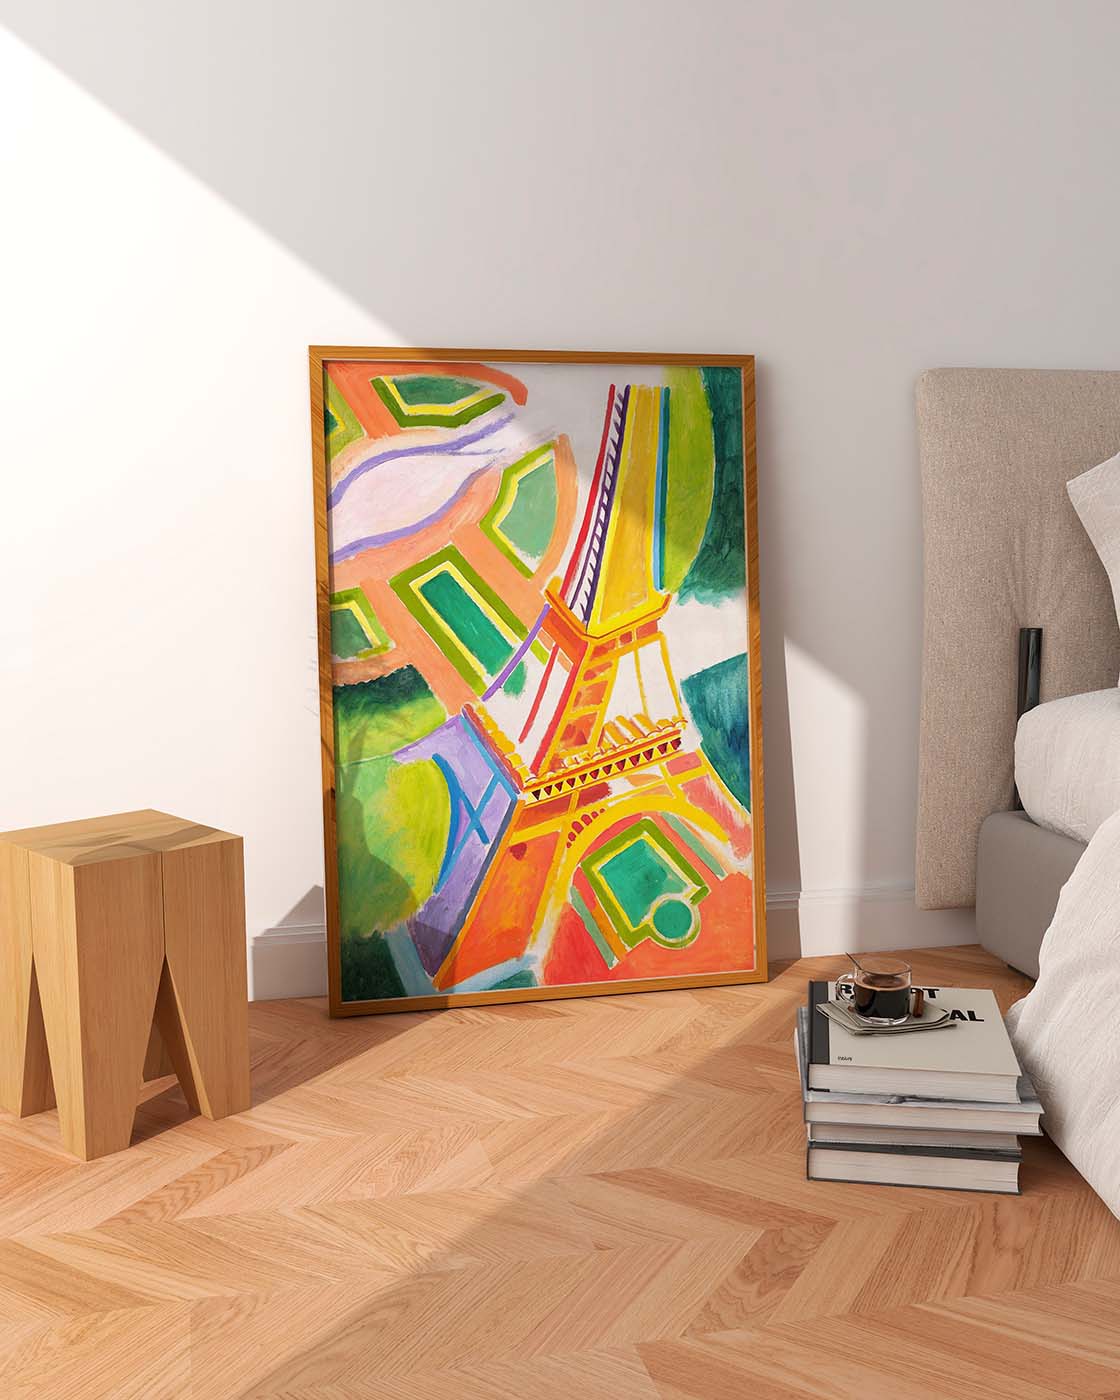 Abstract artwork by Robert Delaunay featuring the Eiffel Tower composed of bright, vivid colors and geometric shapes